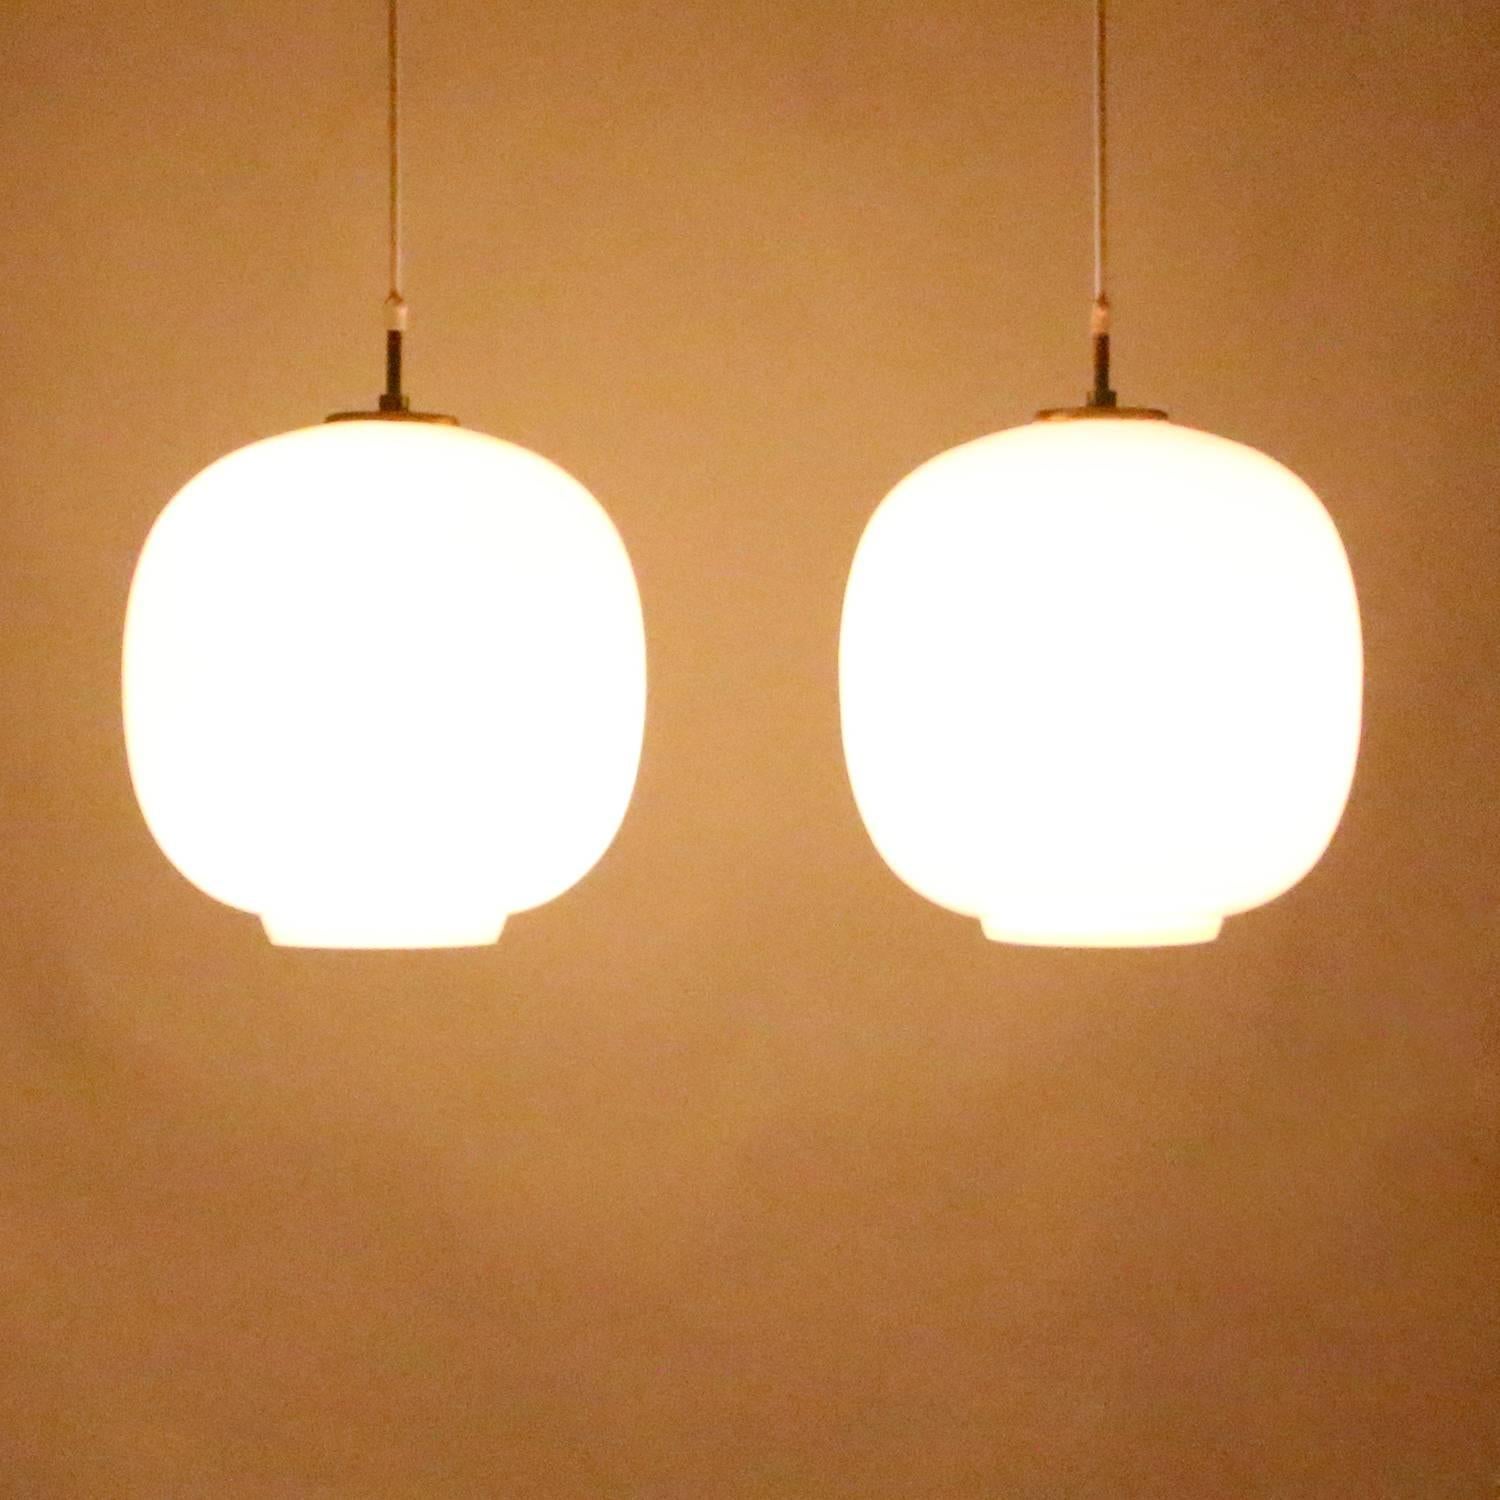 Radiohus pendant pair of (large) by Vilhelm Lauritzen in 1945, and produced by Louis Poulsen - extremely attractive pair of blown glossy white opal glass lamps, the vintage edition!

A pair of timeless pieces with a very appealing organic shape,